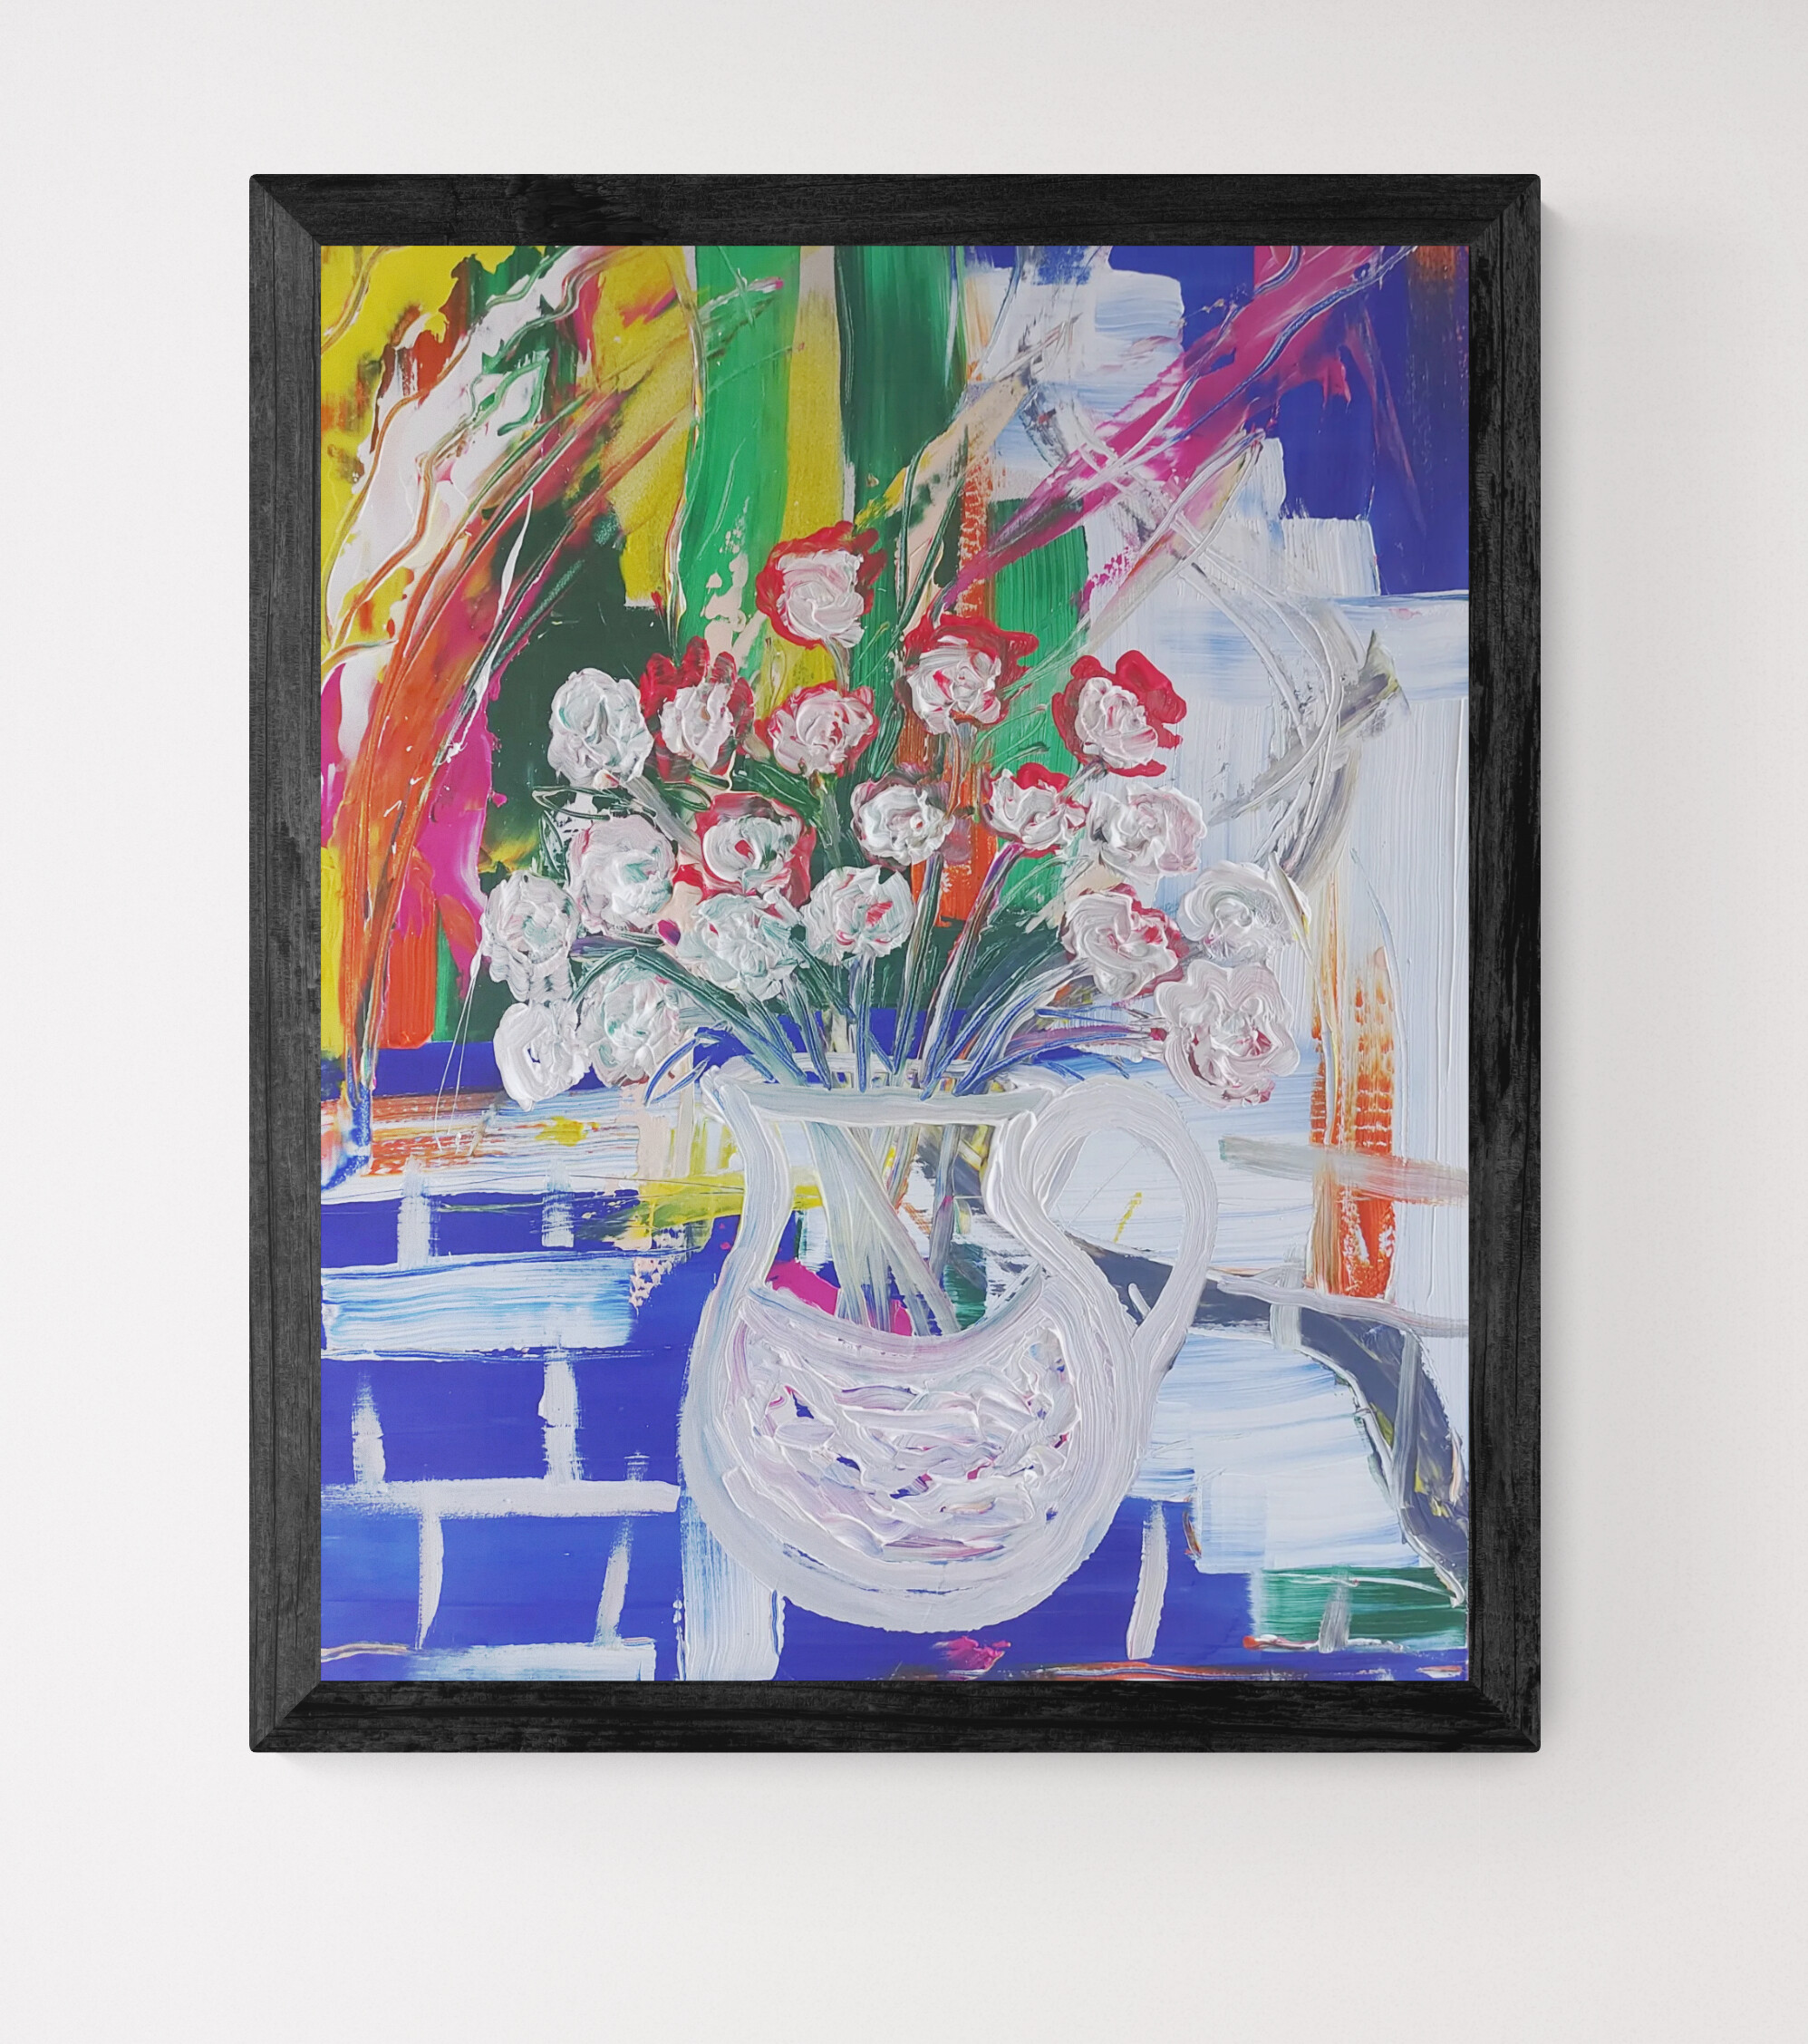 Chinwe Russell, "The Vase", framed acrylic on board, 60 x 80cm, c. 2022. This piece is an abstract